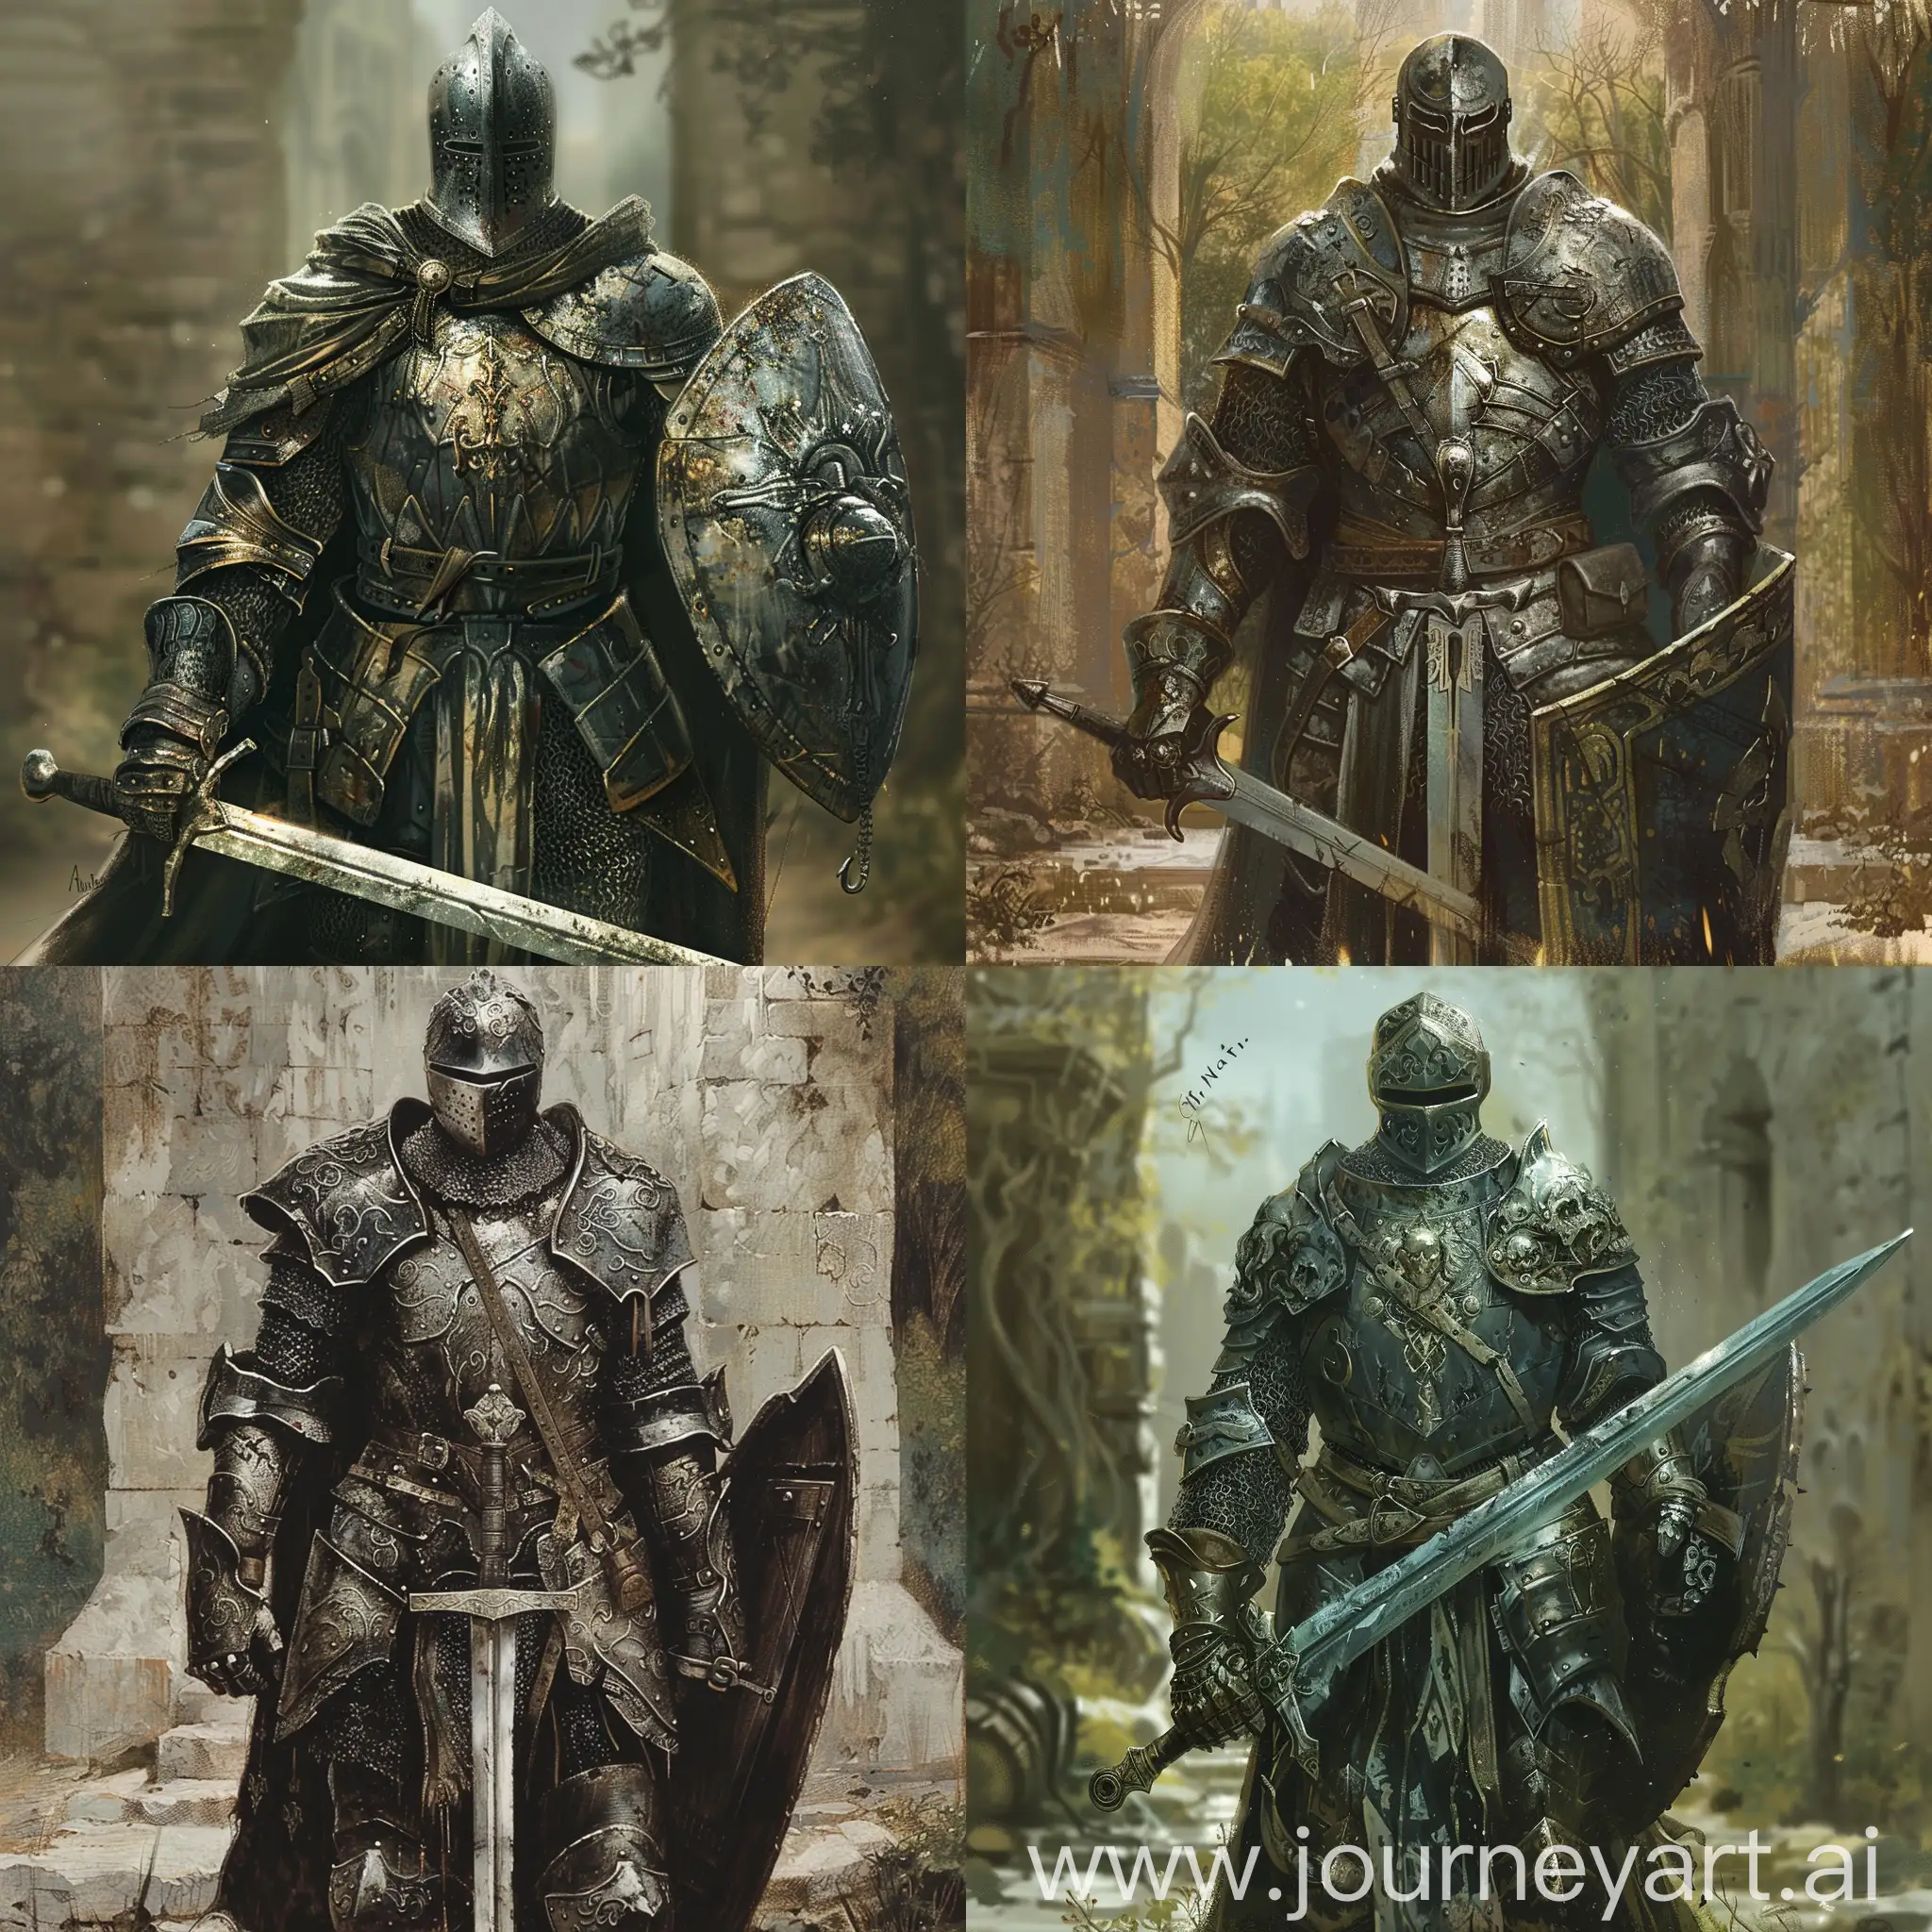 reate an image of a knight in armor without a helmet. The knight should be standing proudly, holding a sword in one hand and a shield in the other. The armor should be detailed, with intricate designs and textures. The knight's expression should convey determination and strength, with a hint of nobility. The background can be a medieval setting, such as a castle courtyard or a forest clearing, adding to the atmosphere of chivalry and adventure.